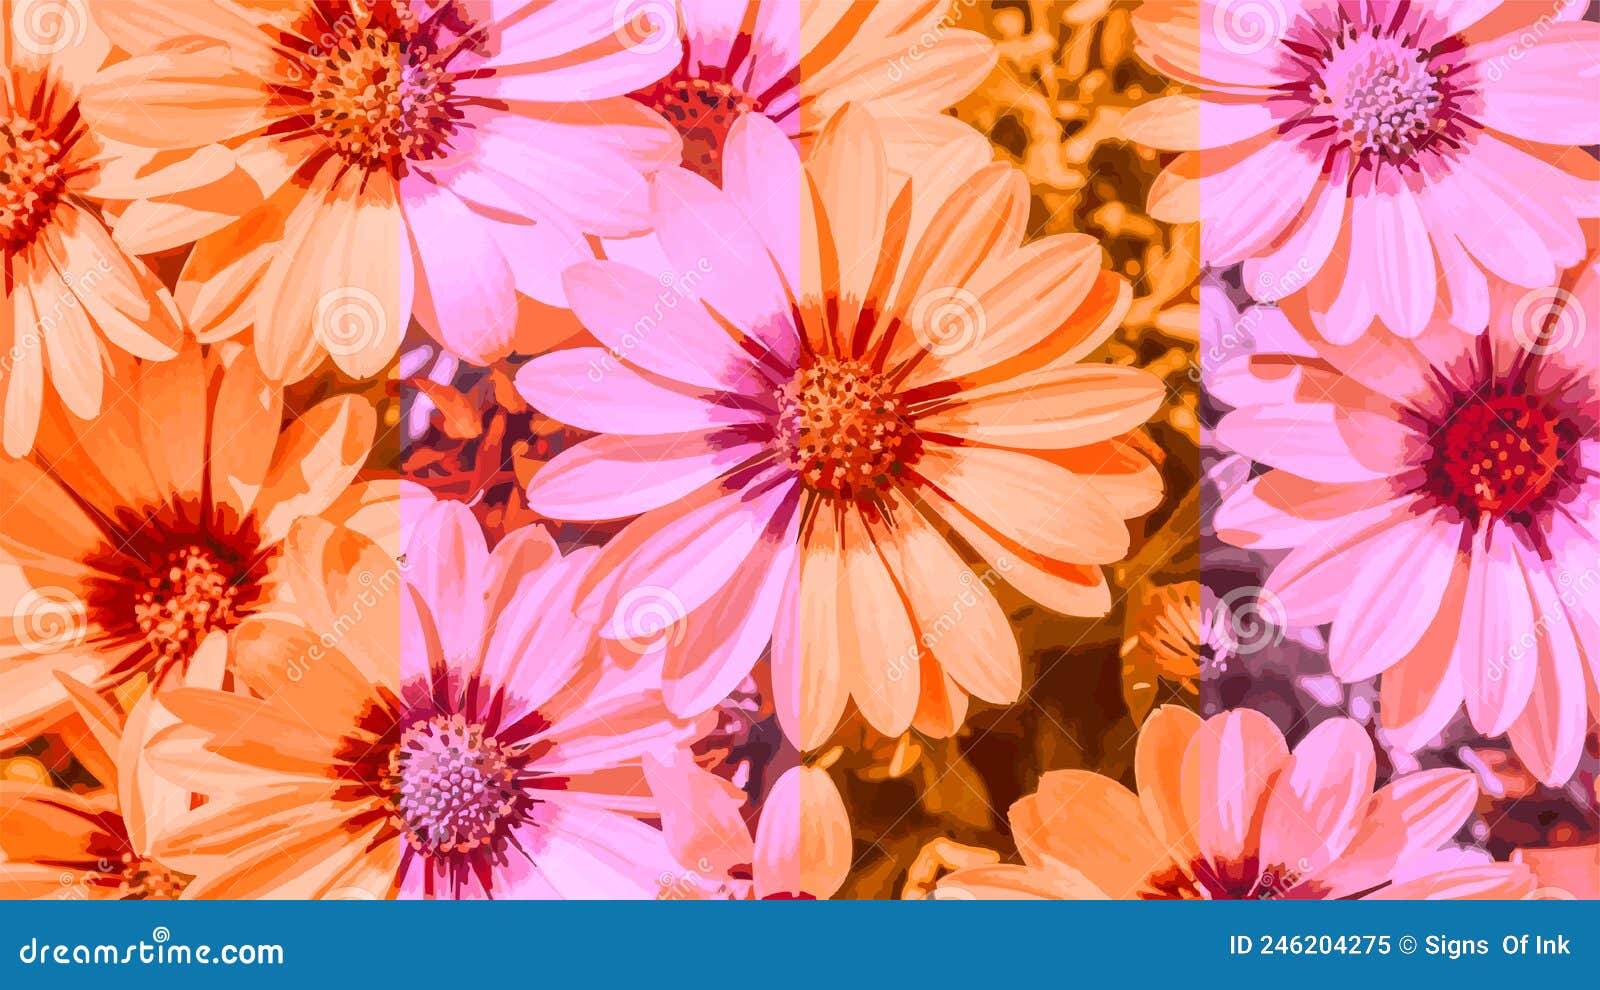 Printable Floral Aesthetic Wallpapers Stock Image - Image of decoration,  summer: 246204275